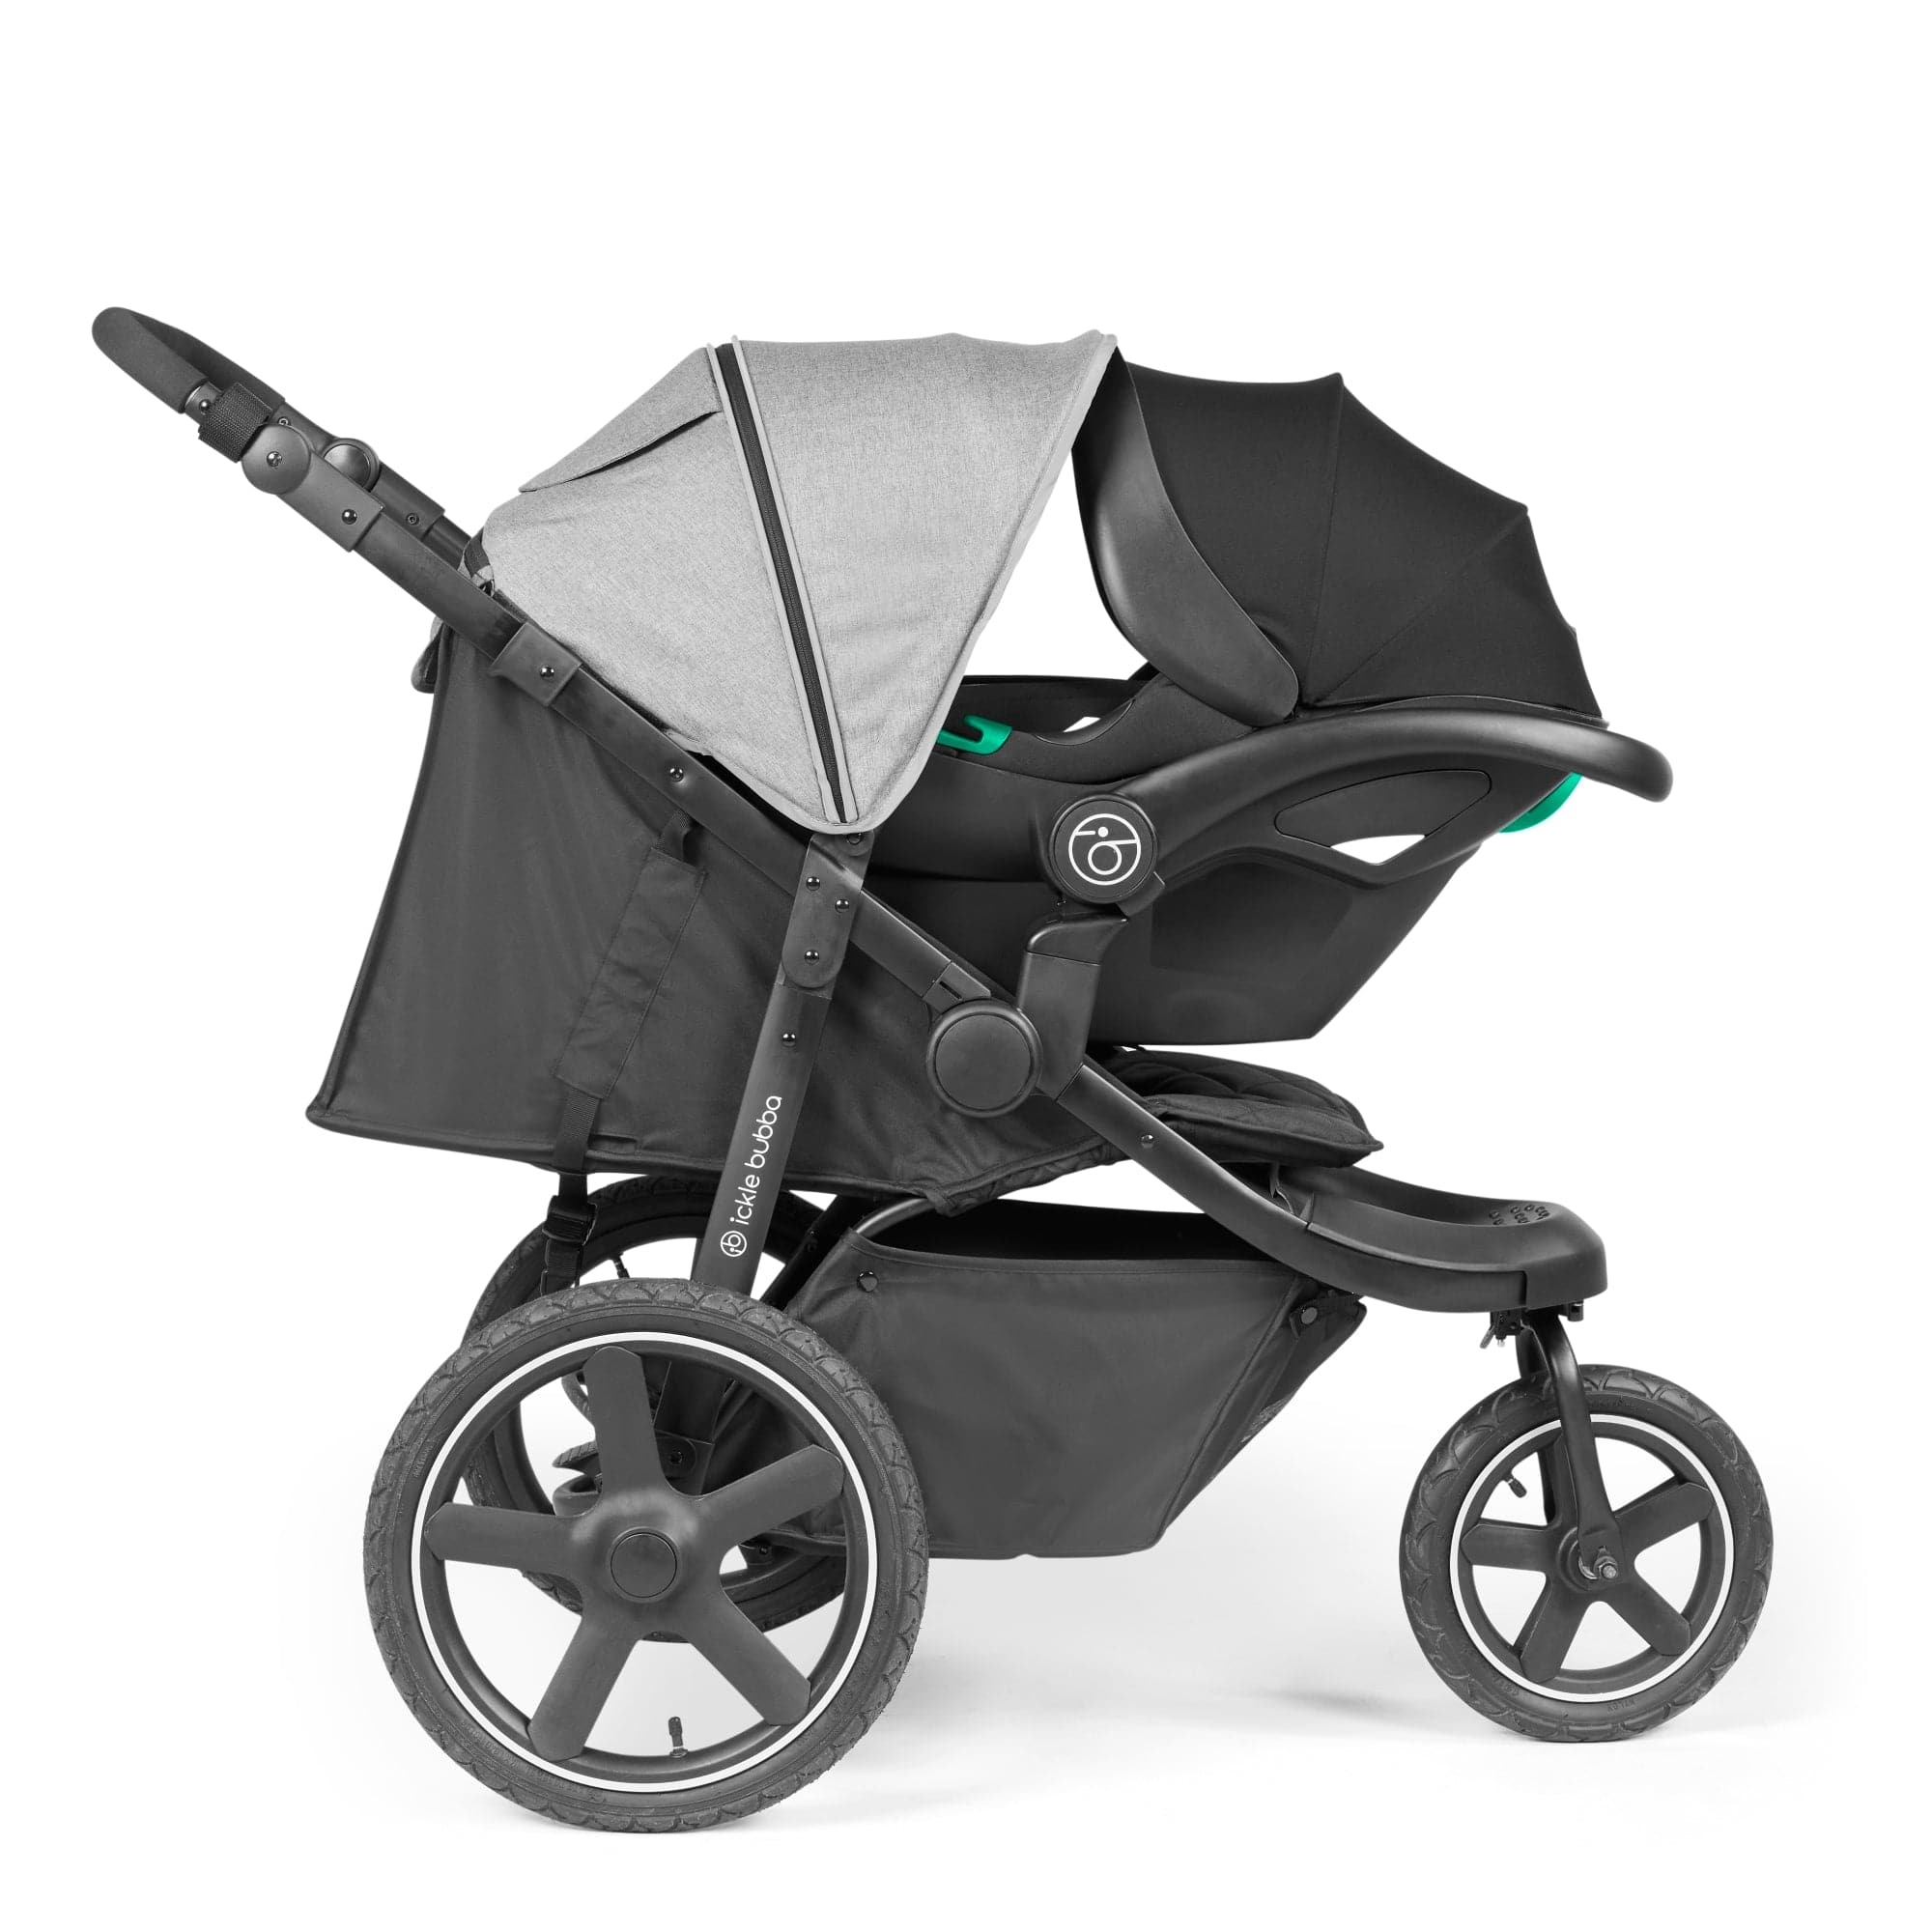 Ickle Bubba Venus Prime Jogger 3 Wheel Stroller I-Size Travel System with Isofix Base - Space Grey - For Your Little One